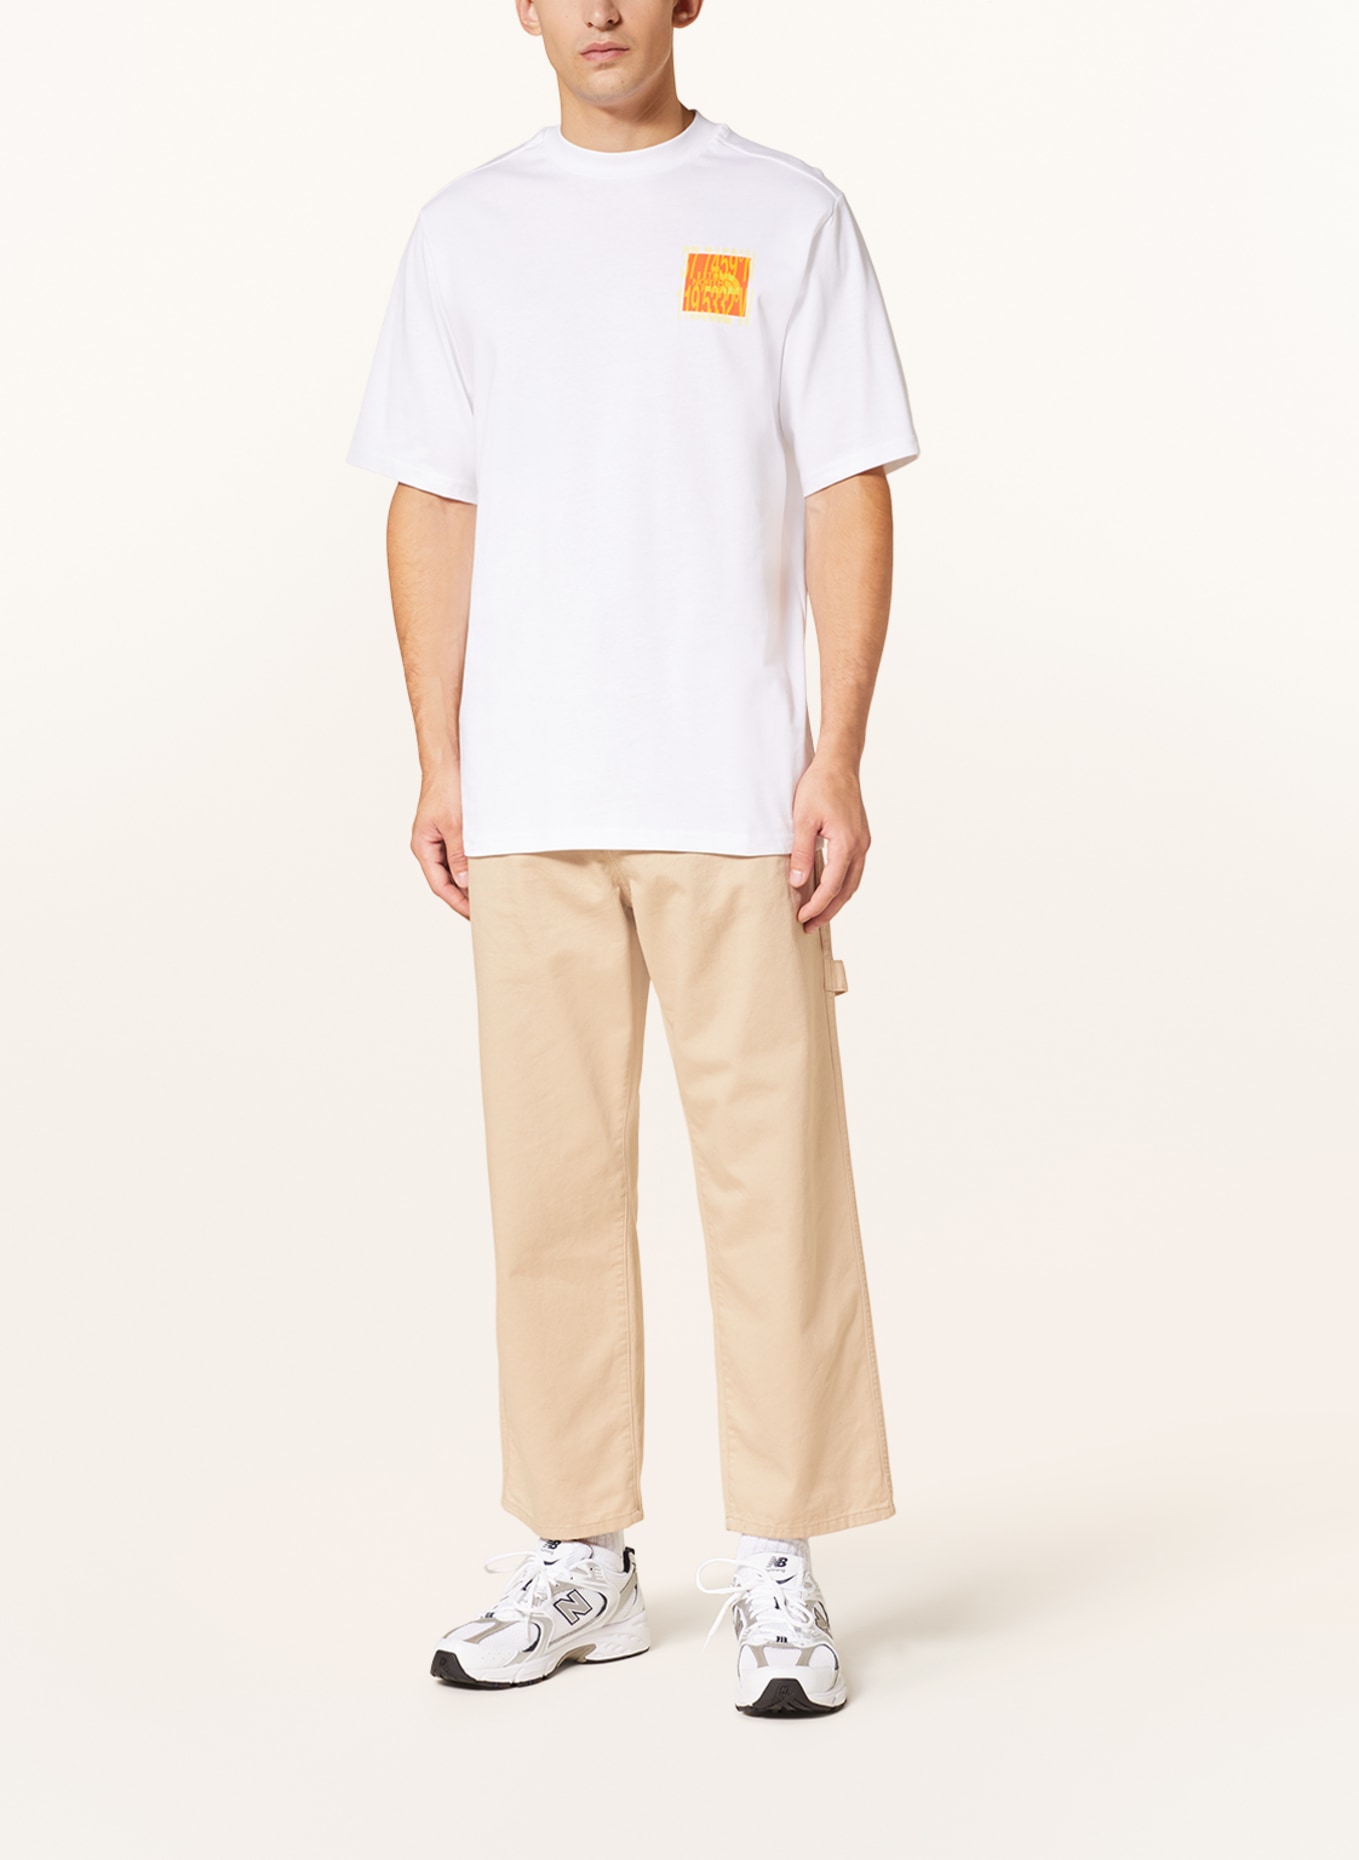 THE NORTH FACE T-shirt, Color: WHITE (Image 2)